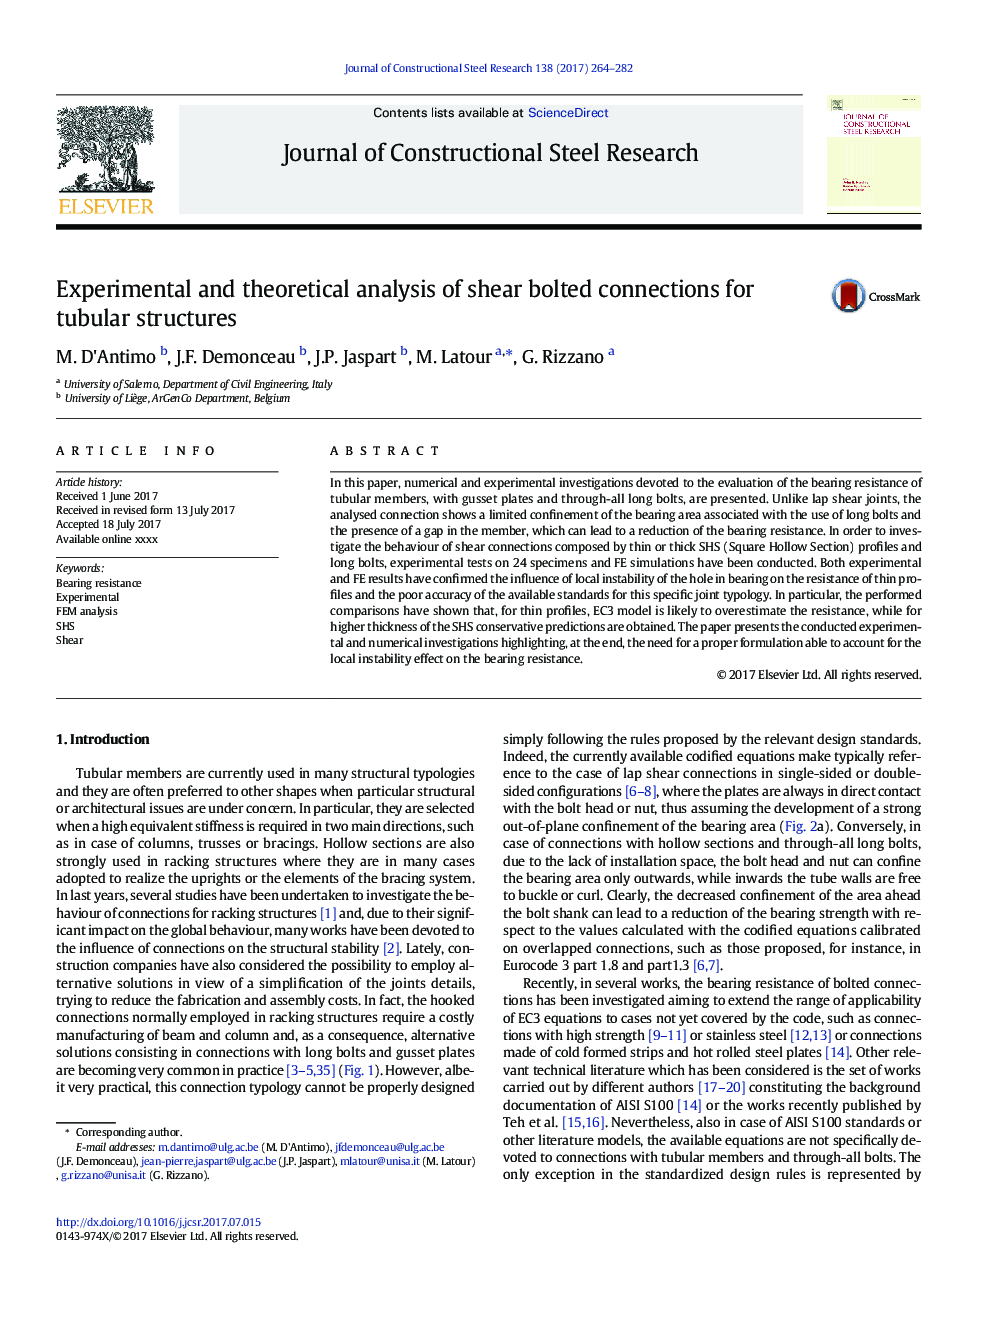 Experimental and theoretical analysis of shear bolted connections for tubular structures